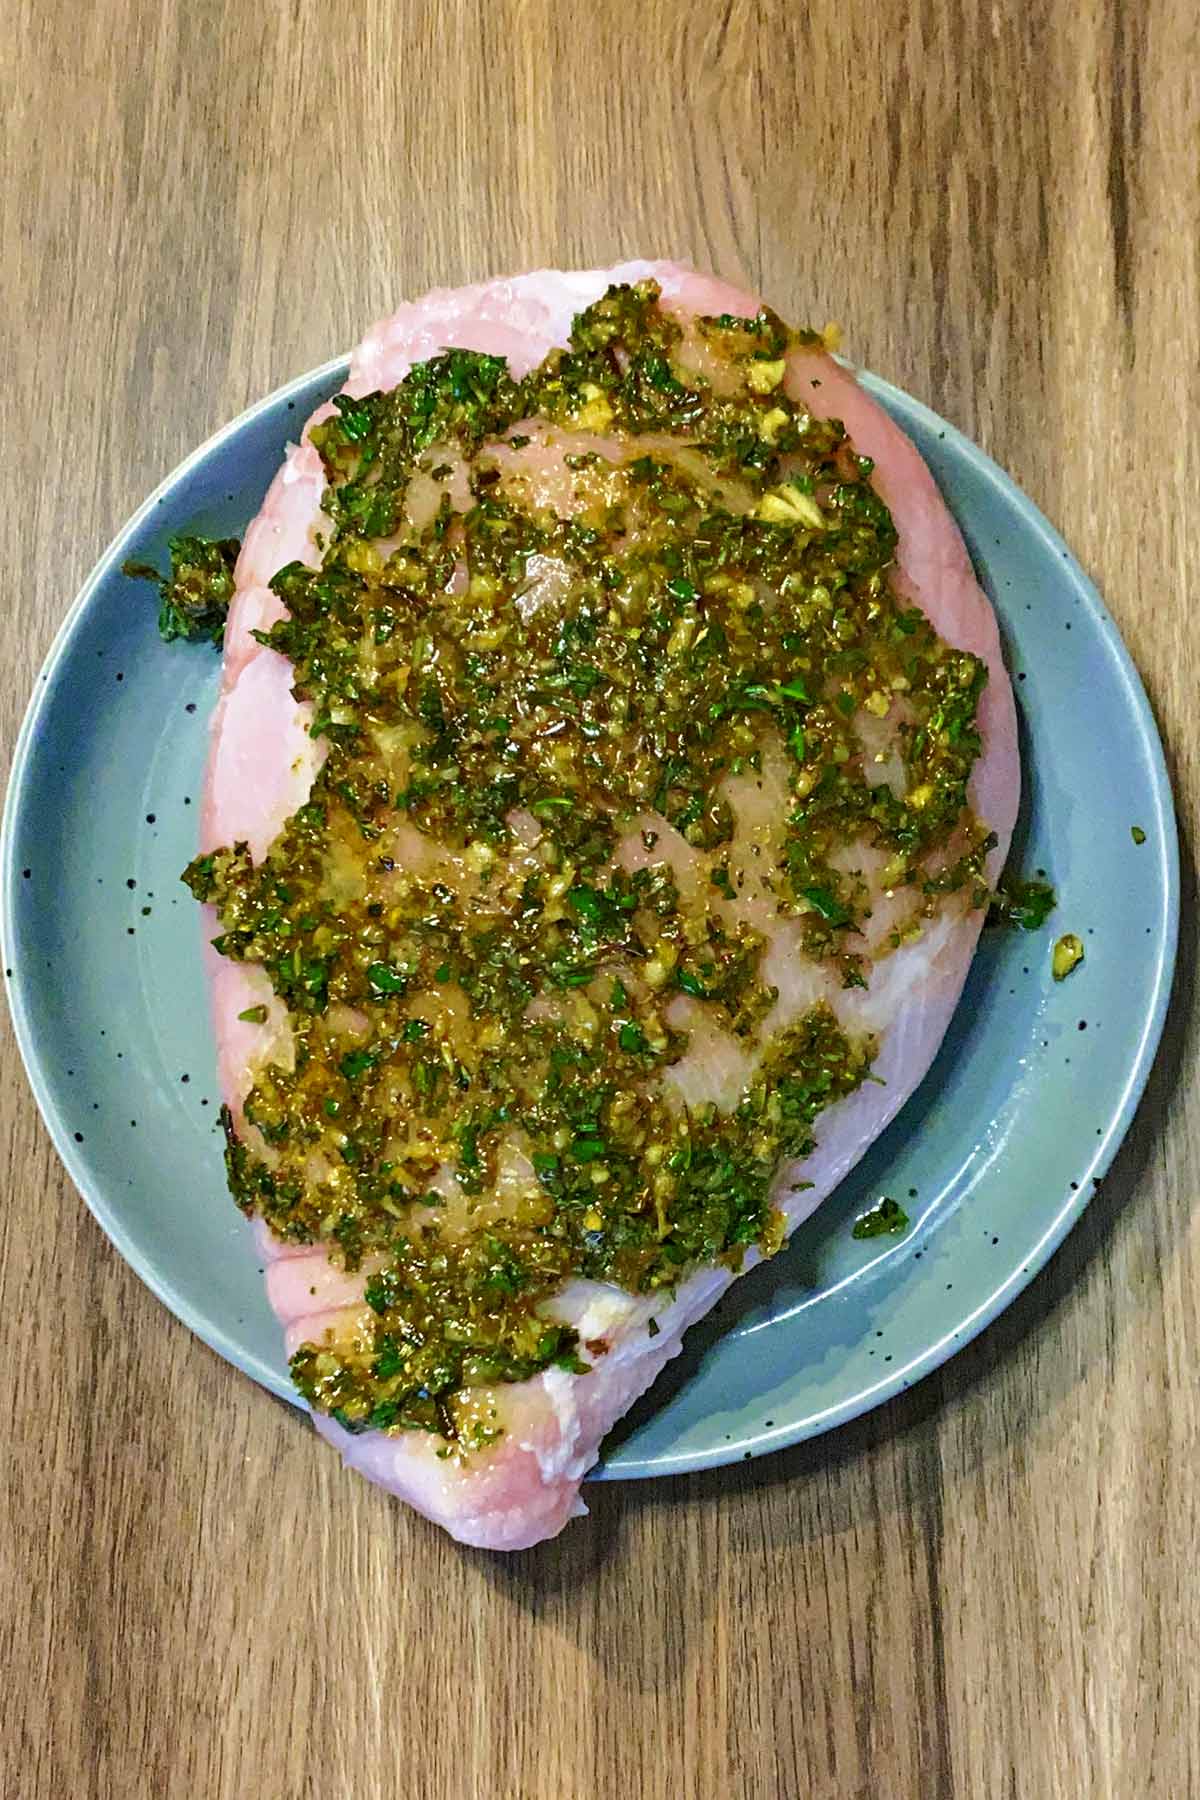 A large turkey breast smothered in marinade.